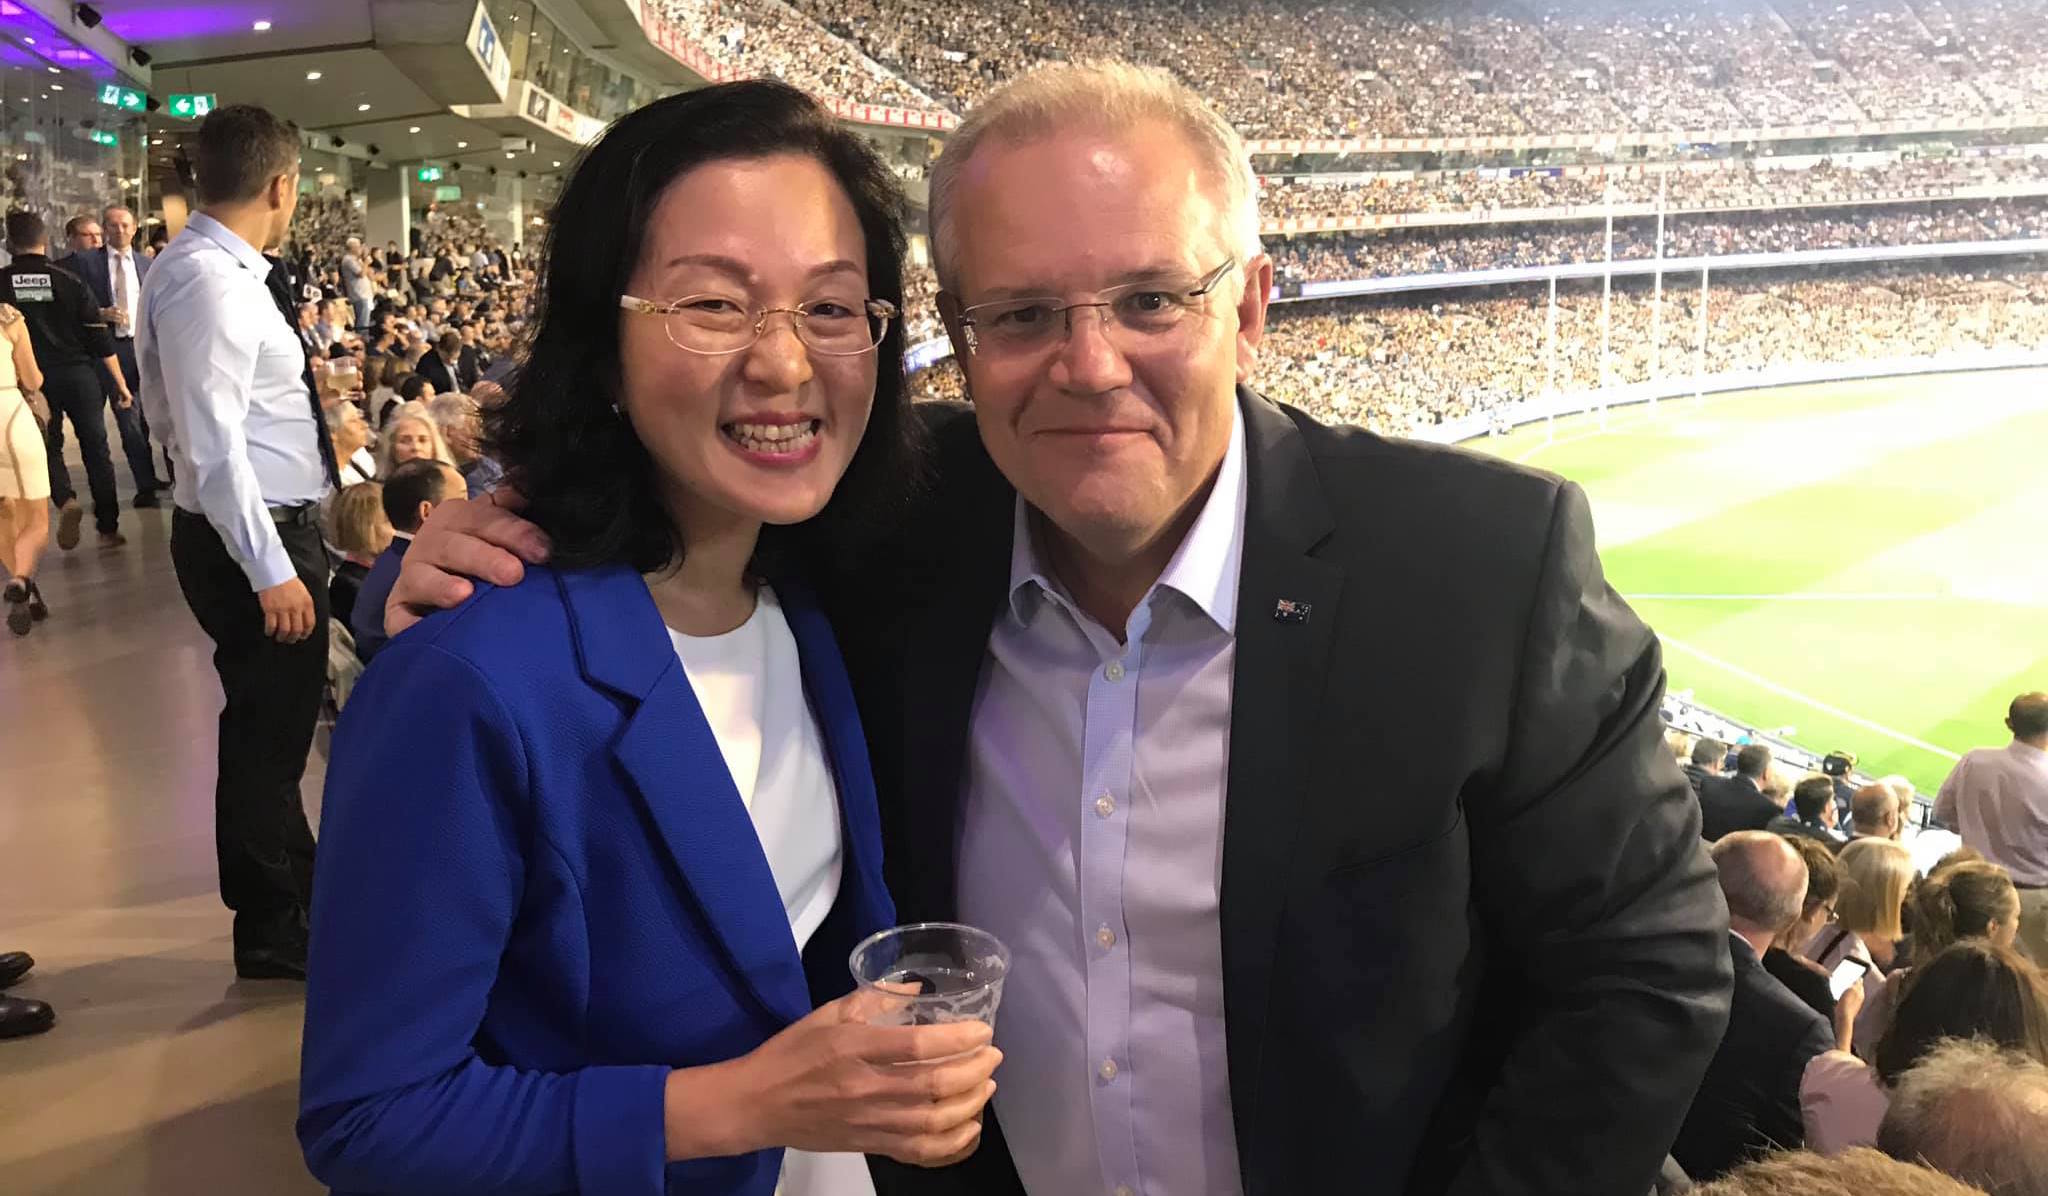 Anti-LGBTI candidate Gladys Liu elected to parliament after winning seat of Chisholm